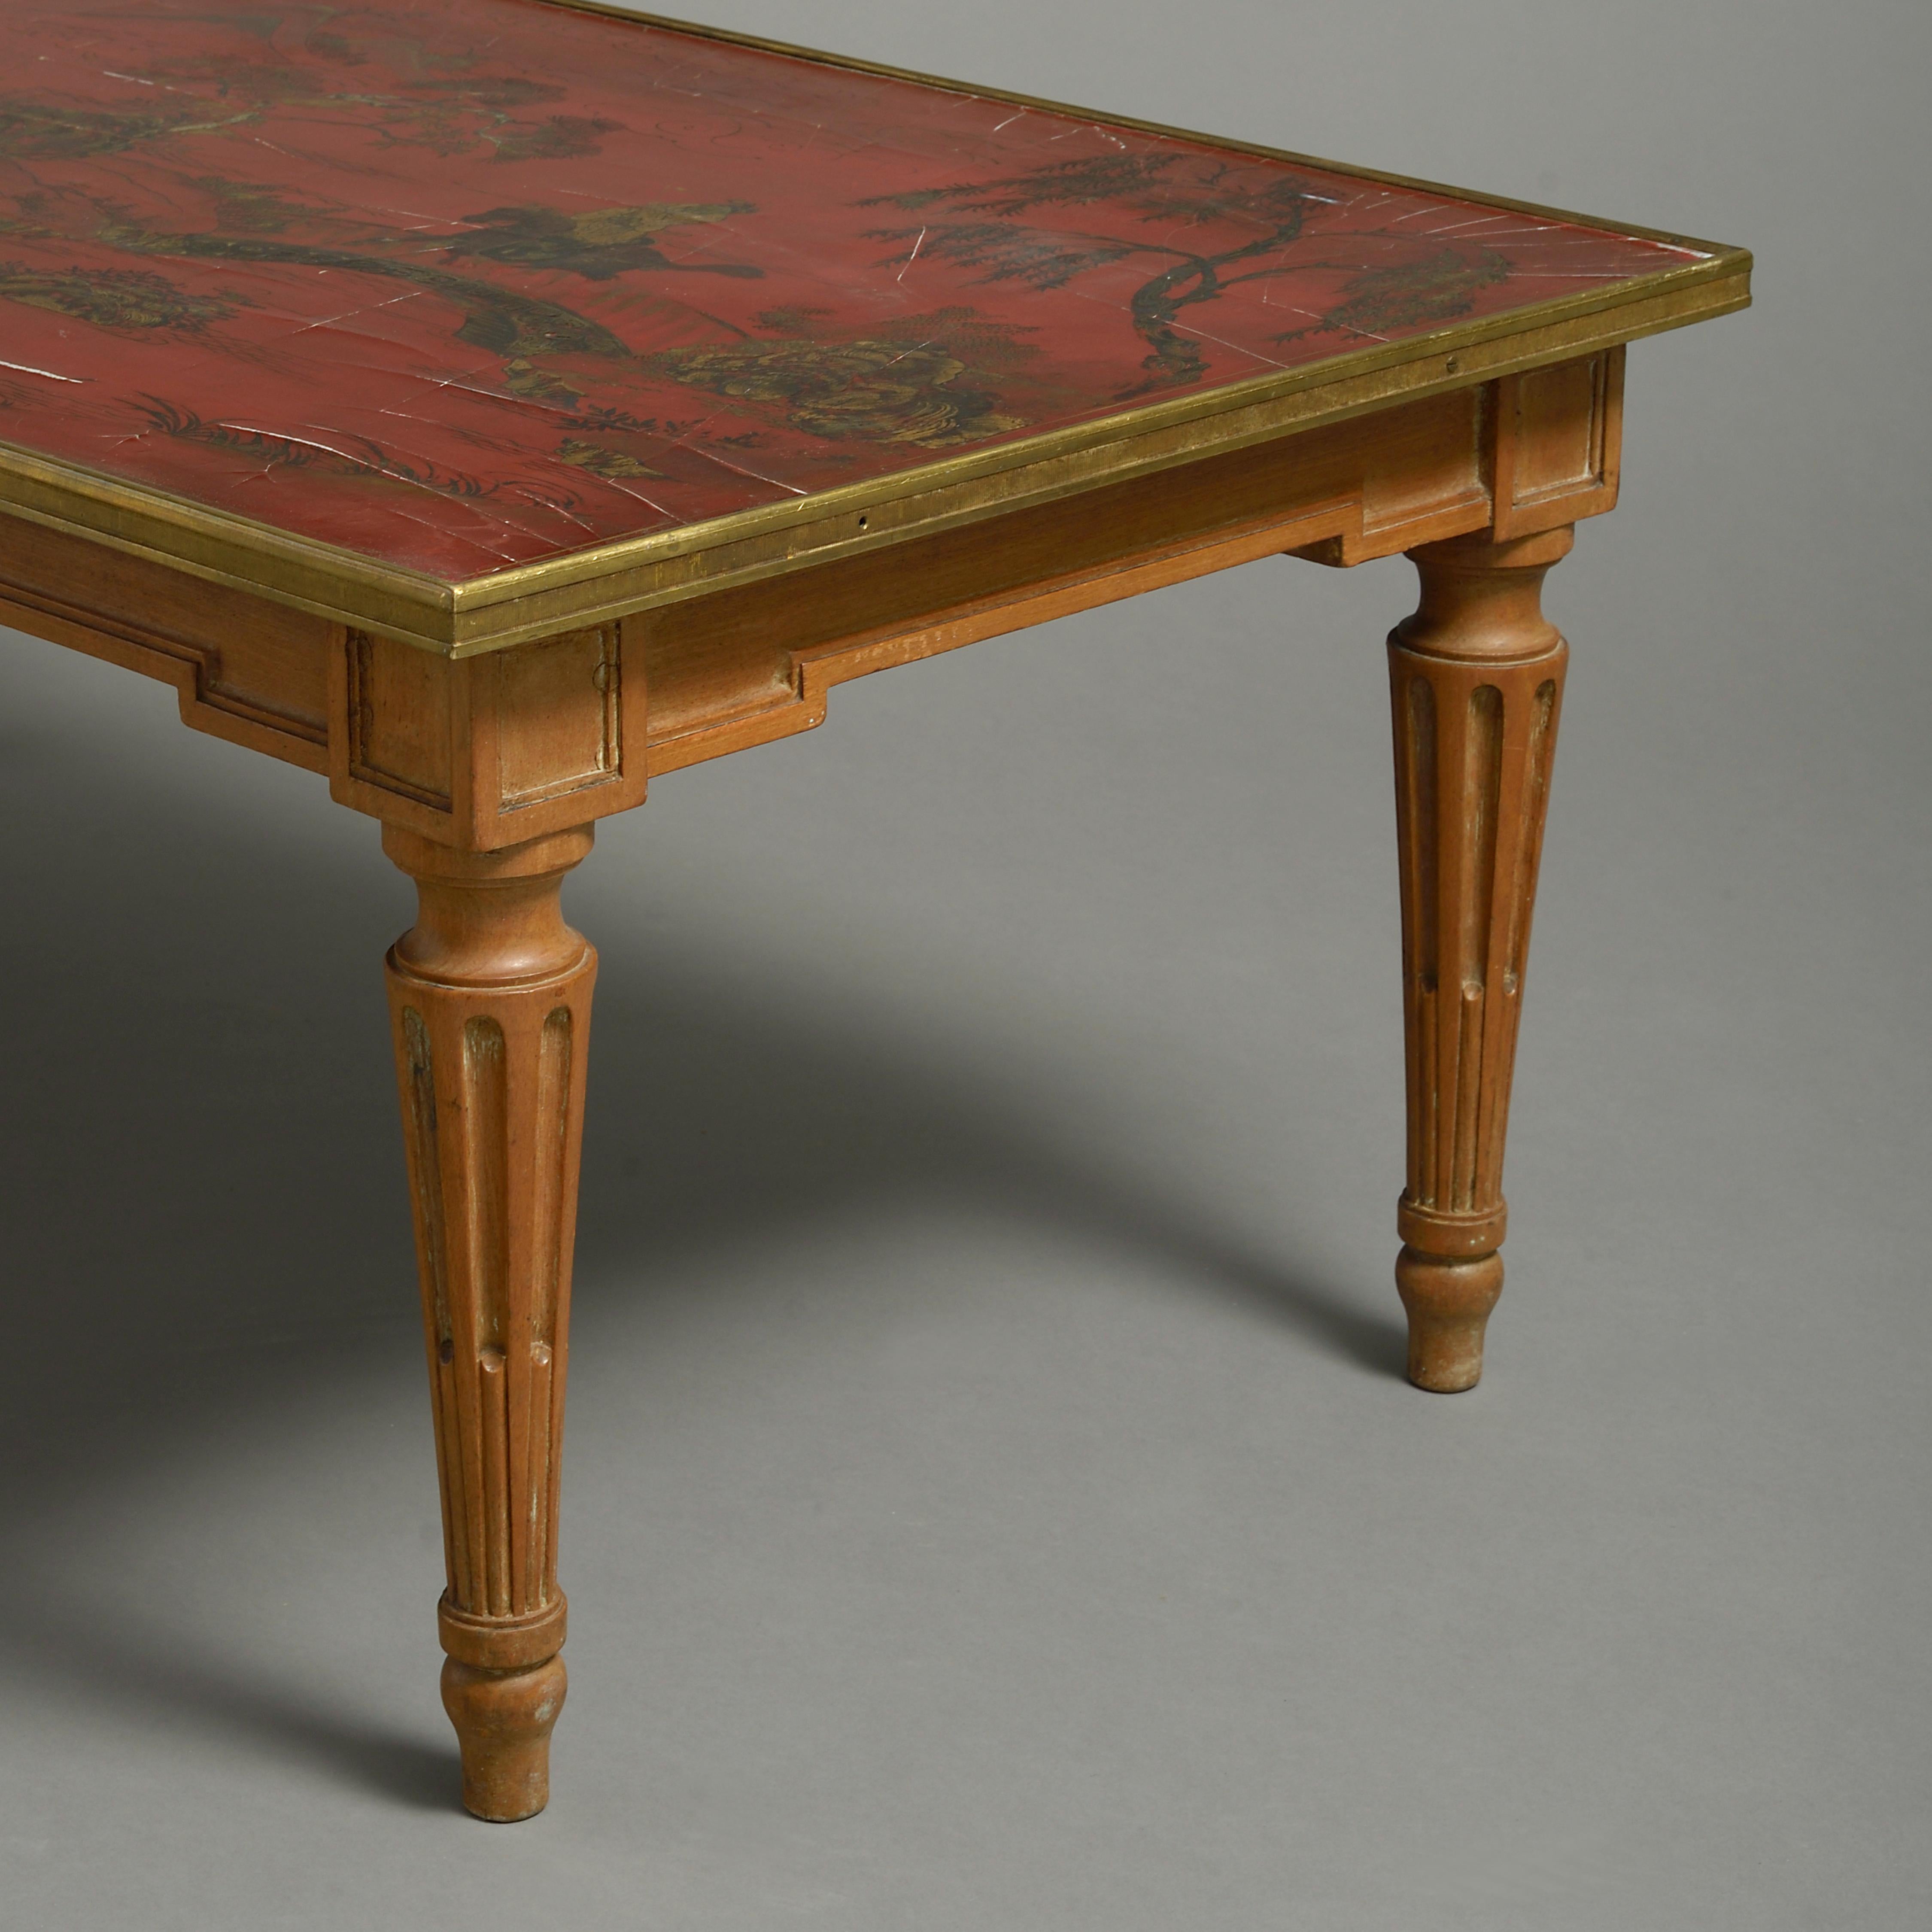 Chinoiserie Early 20th Century Red Lacquer Low Table or Coffee Table